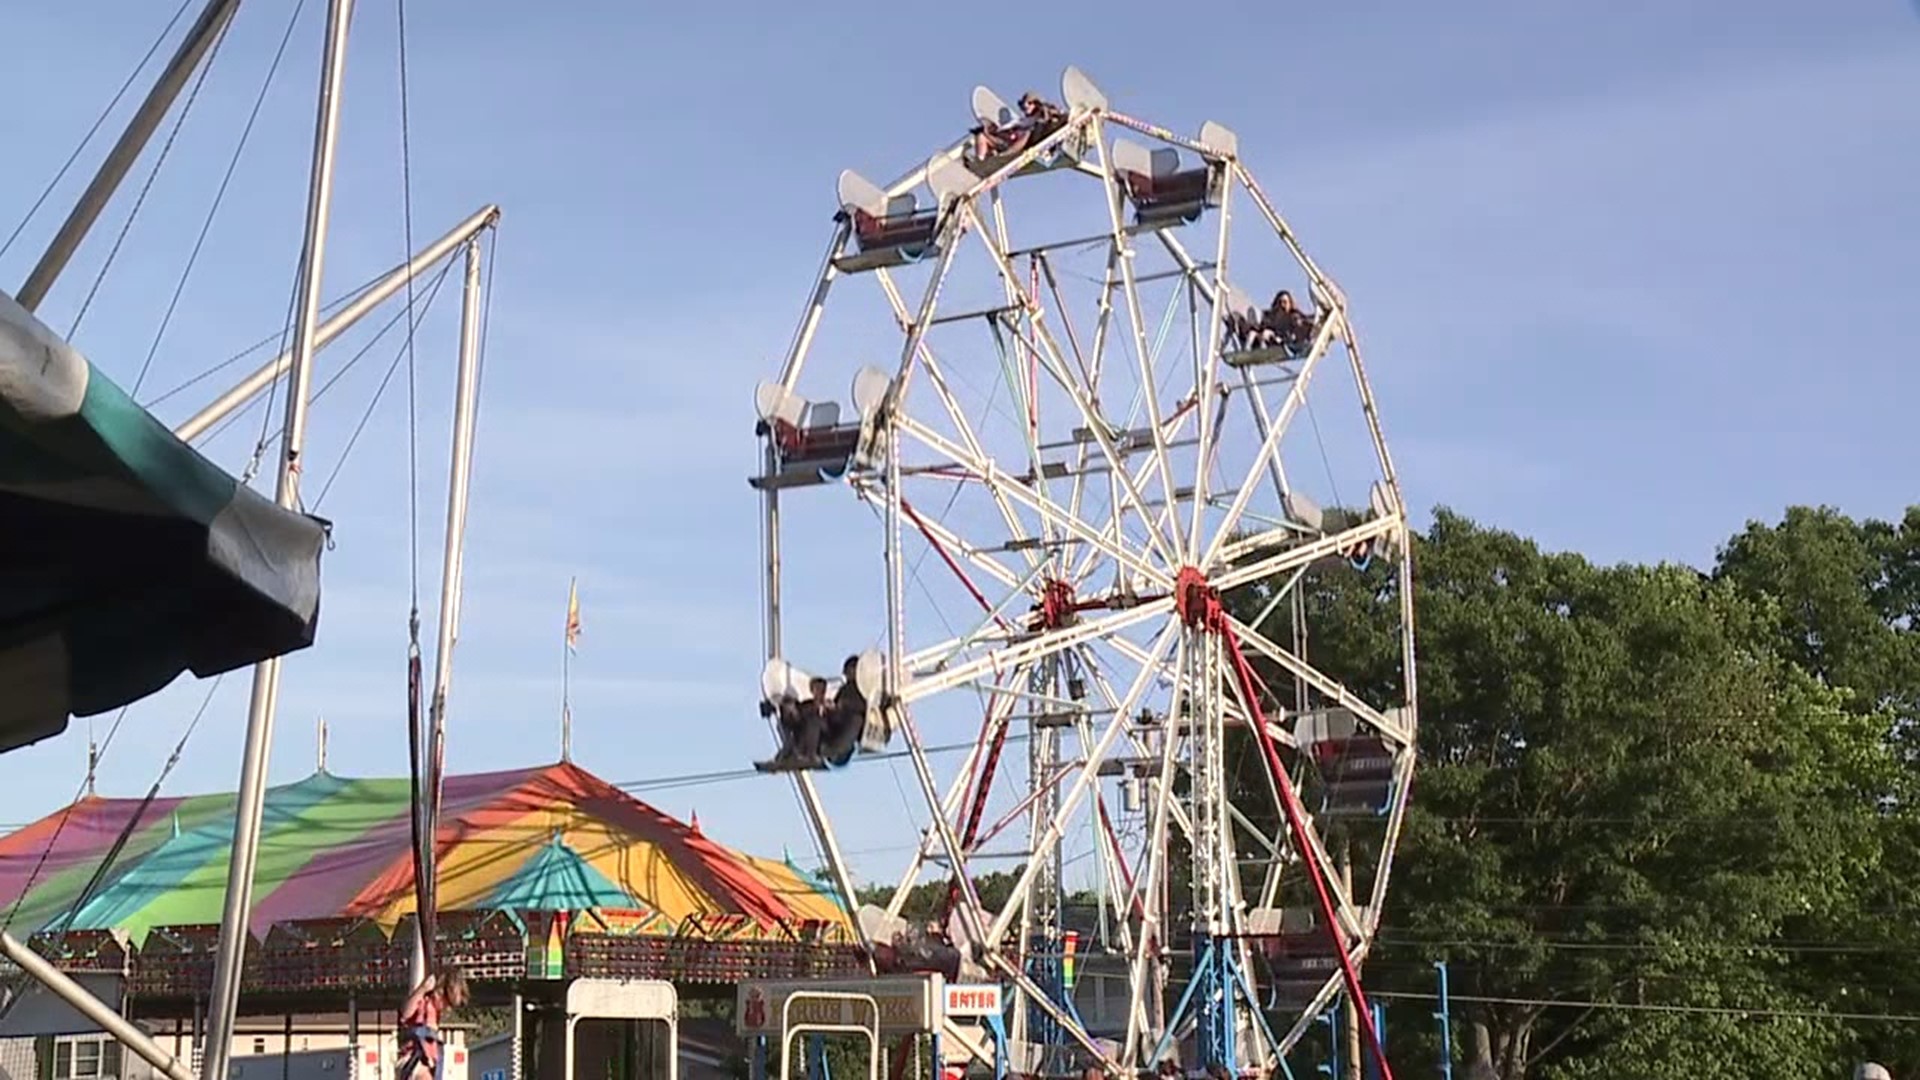 The carnival is a fundraiser for the Jefferson Township Volunteer Fire Company